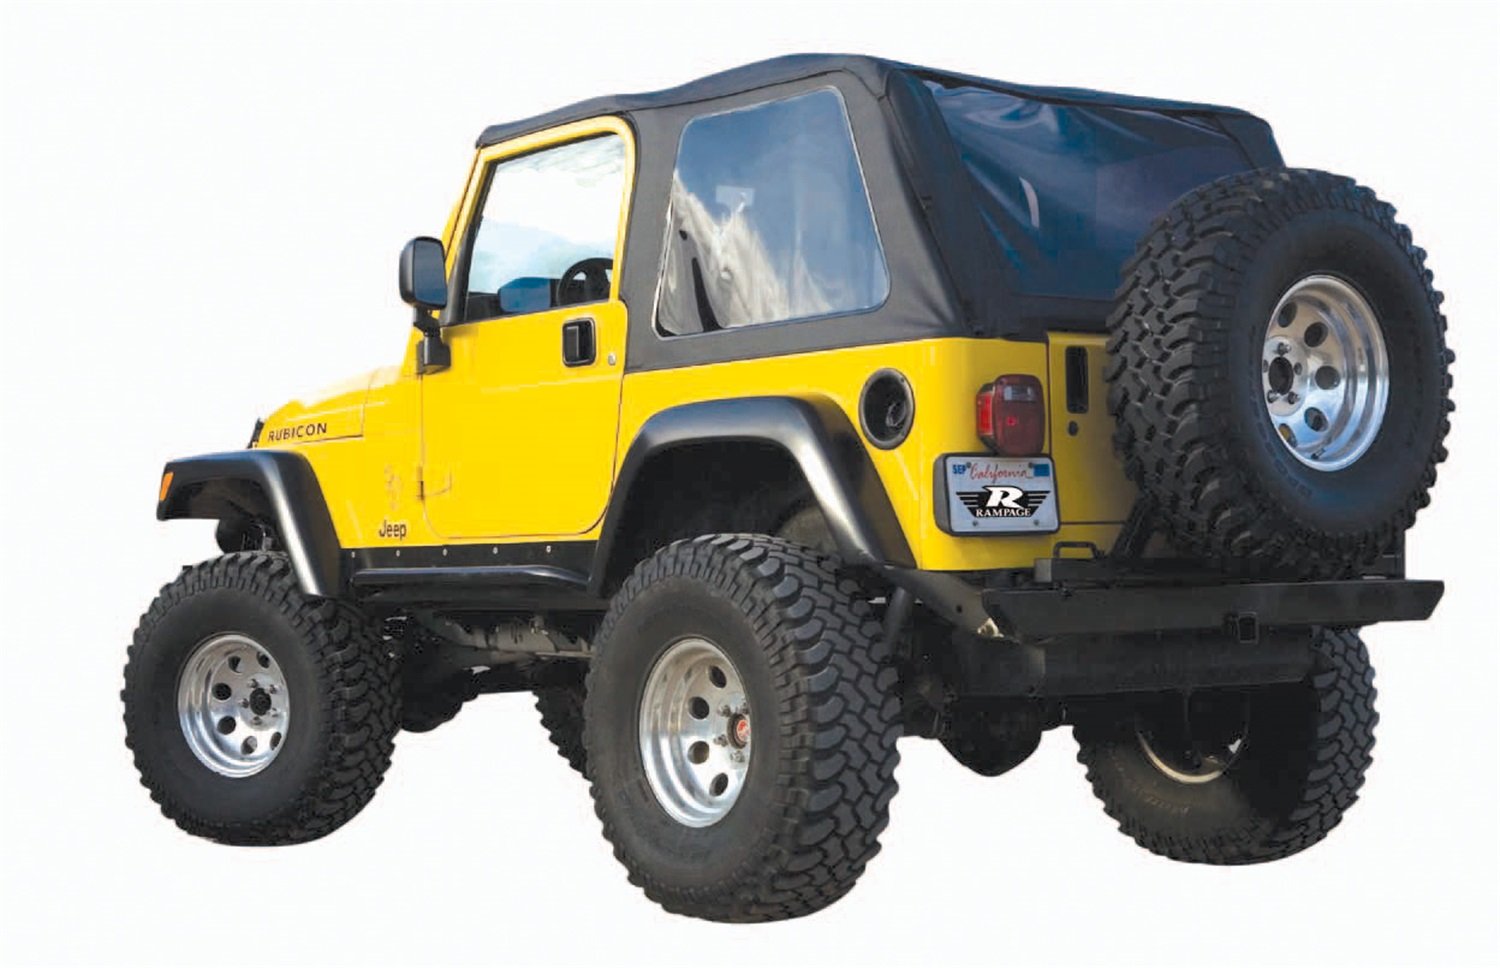 Rampage Trail Top Frameless Soft Top Kit with Tinted Windows - Black  Diamond | Best Prices & Reviews at Morris 4x4